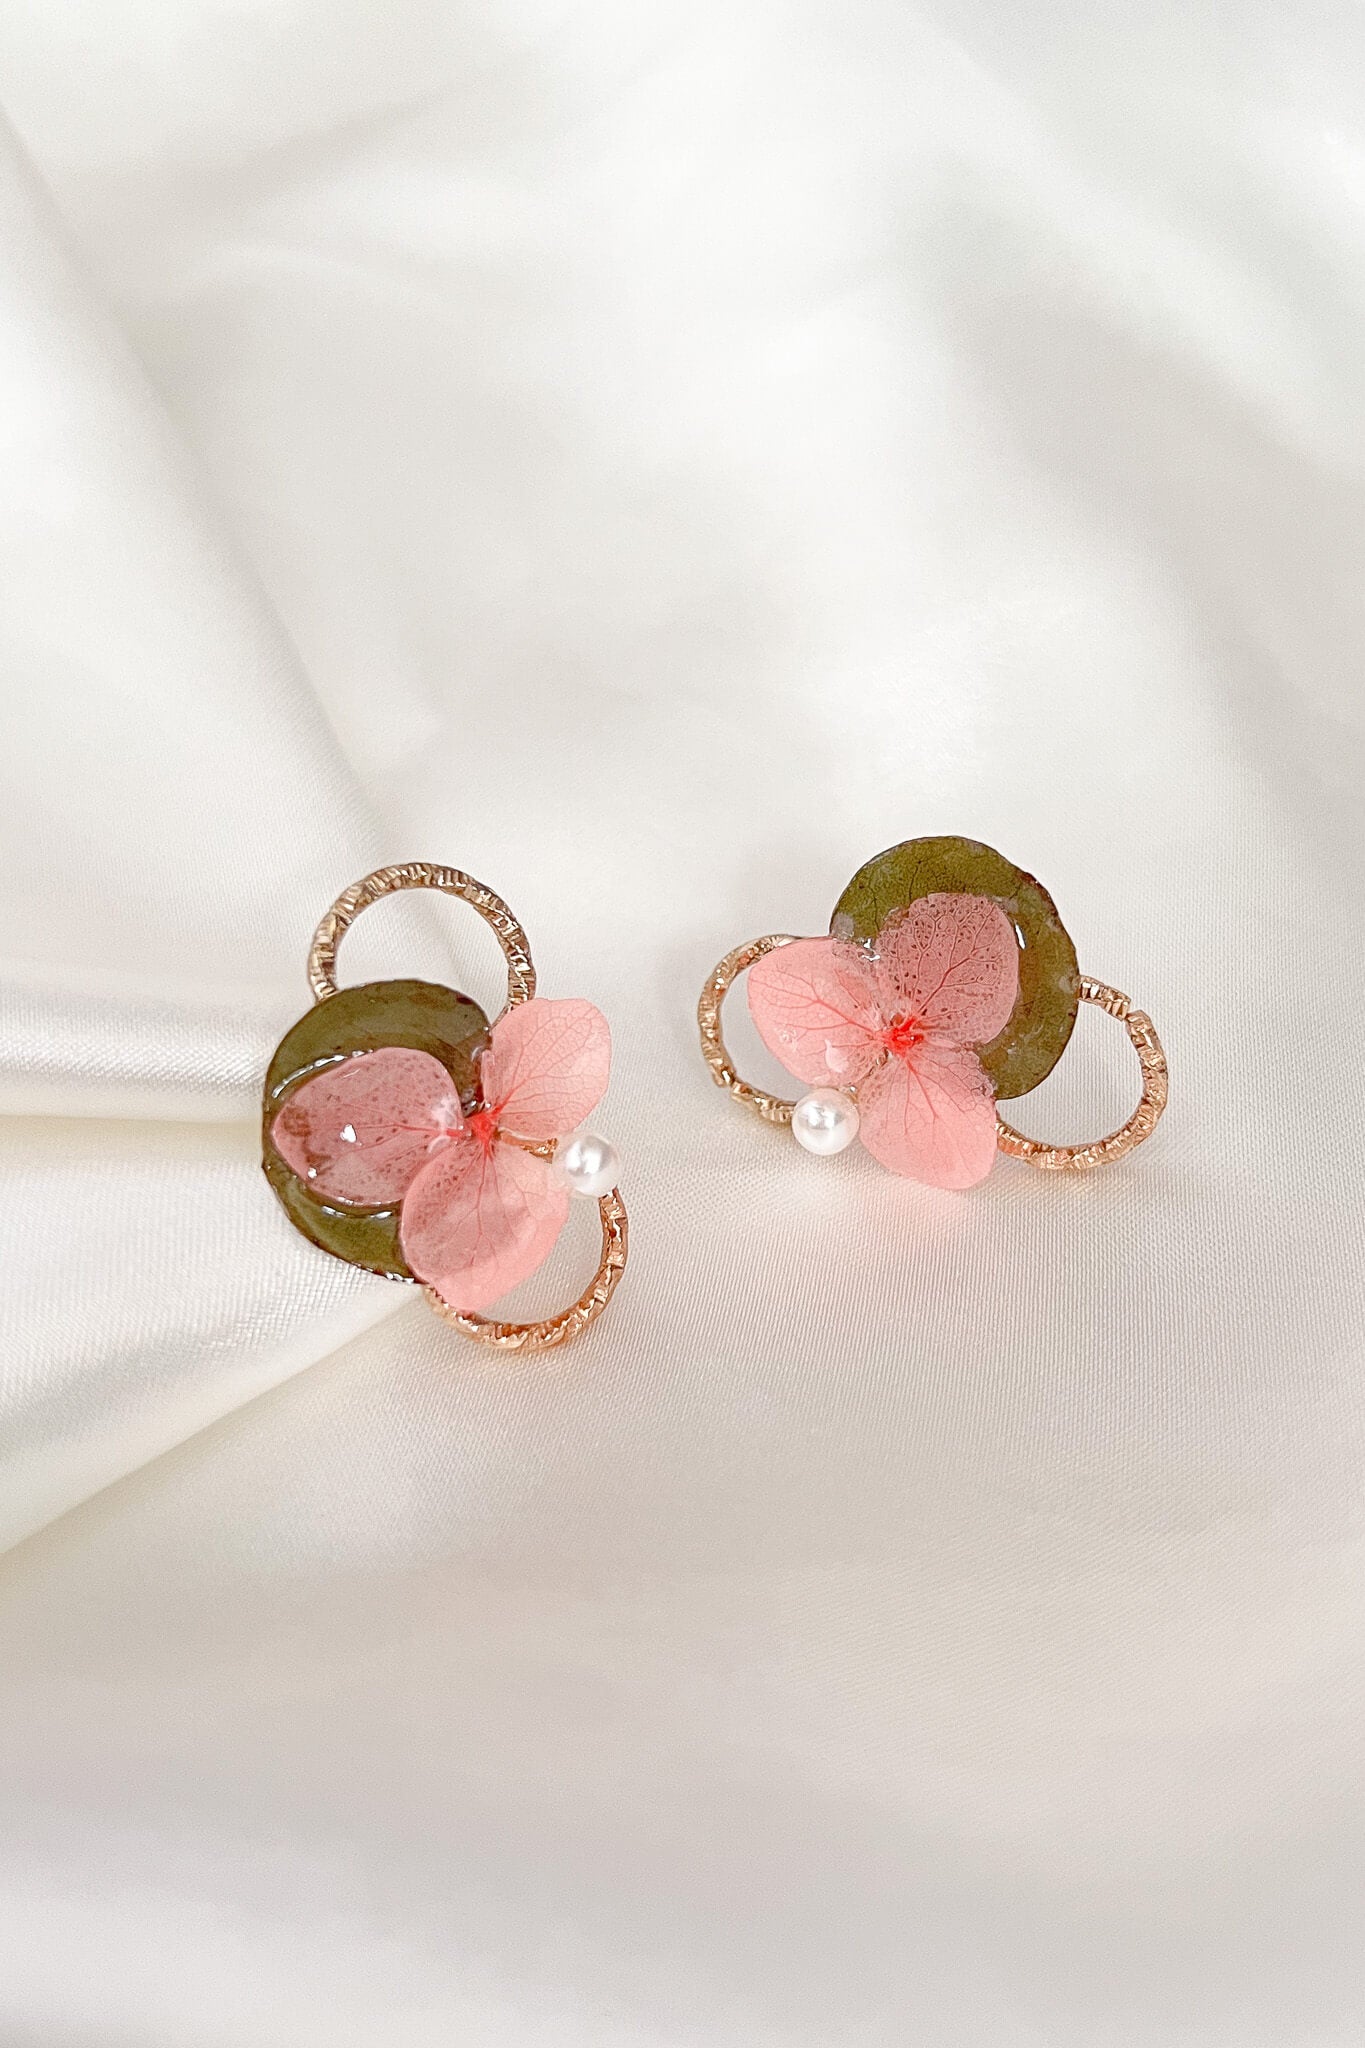 Handmade resin earrings with pearls, hydrangea, eucalyptus and gold hardware accent